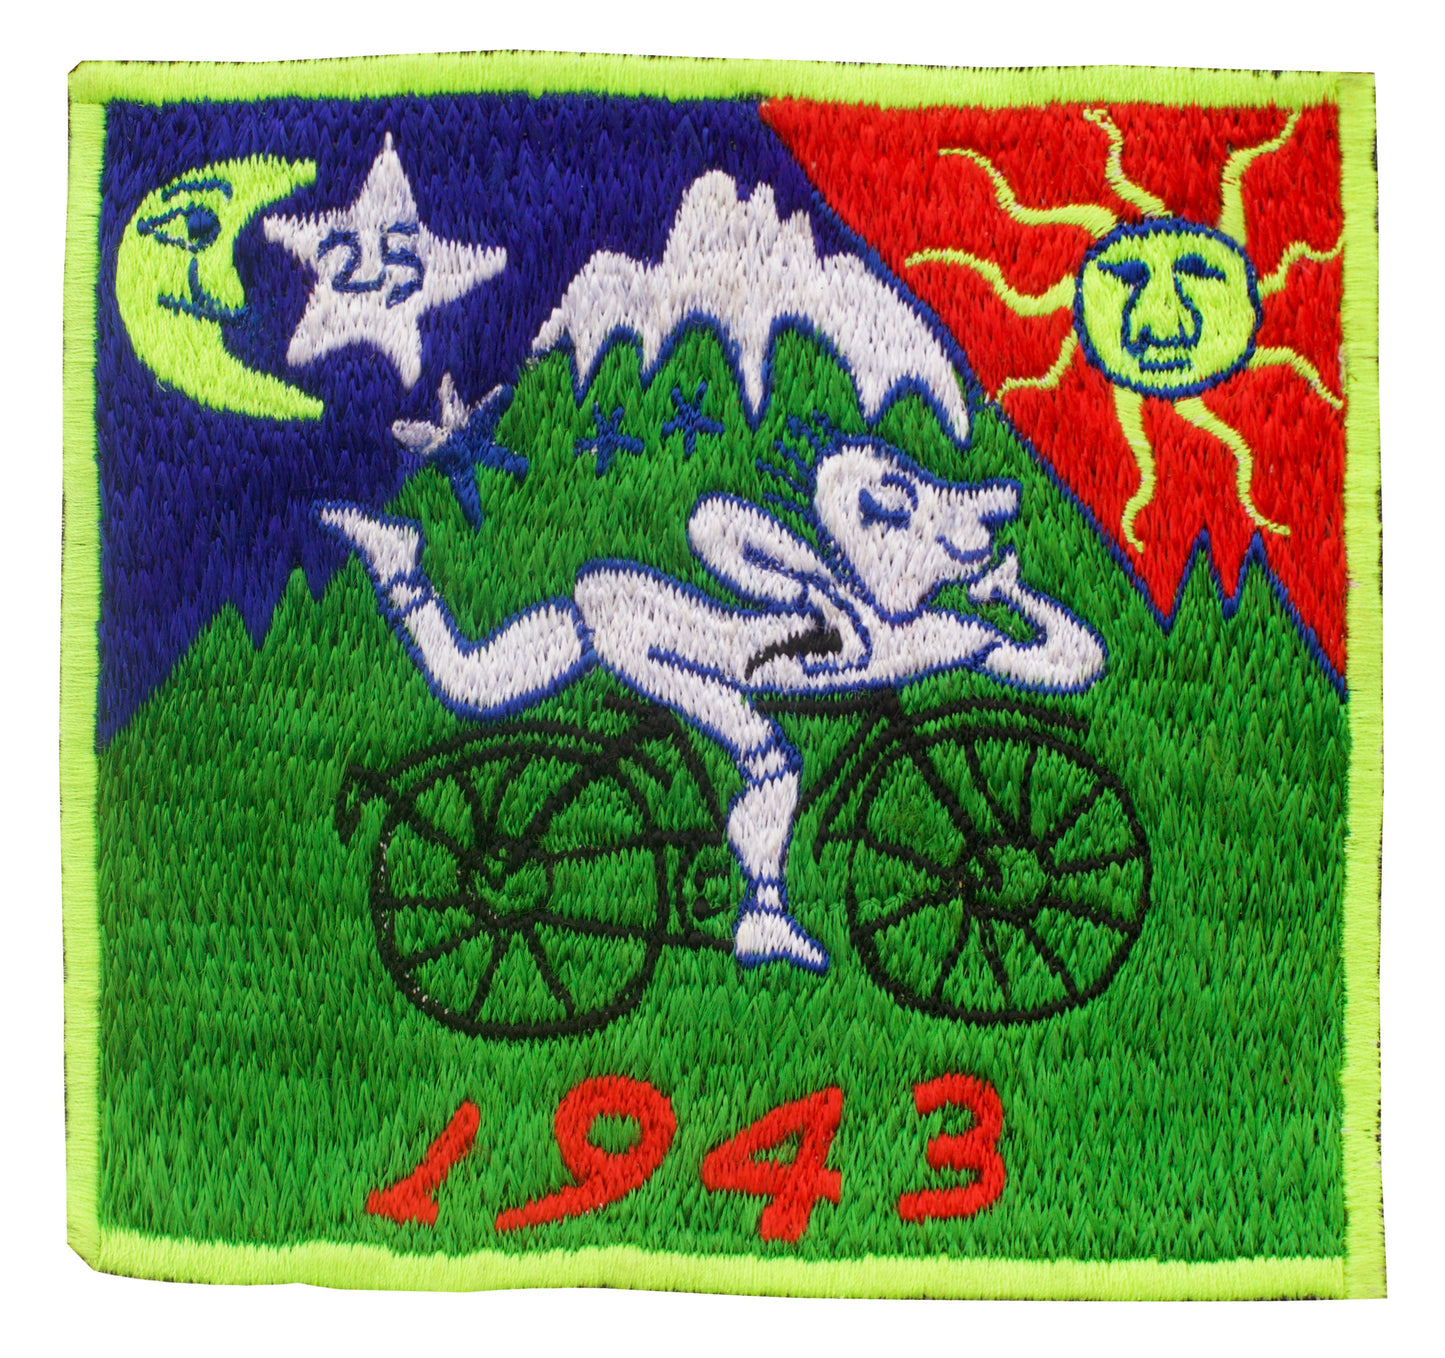 Bicycle Day Patch Albert Hofmann 1943 LSD Psychedelic Hippie Leary 3.5 inch embroidery for sew on goa trance festival wear outfit